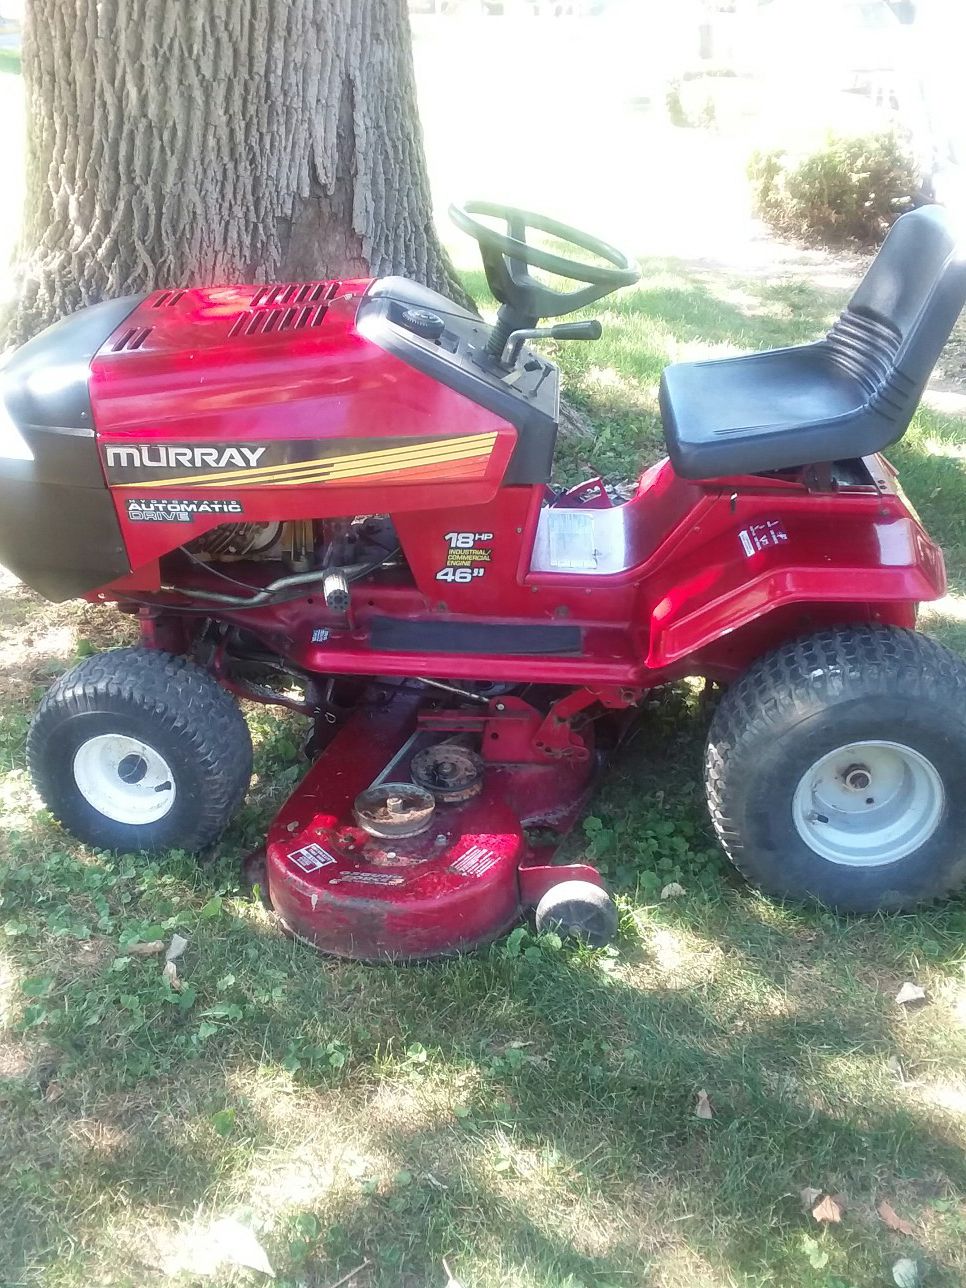 PRICE REDUCTION: Murray Riding Mower with 46 inch cutting deck. ITEM AVAILABLE UNTIL IS SAYS, "Sold."